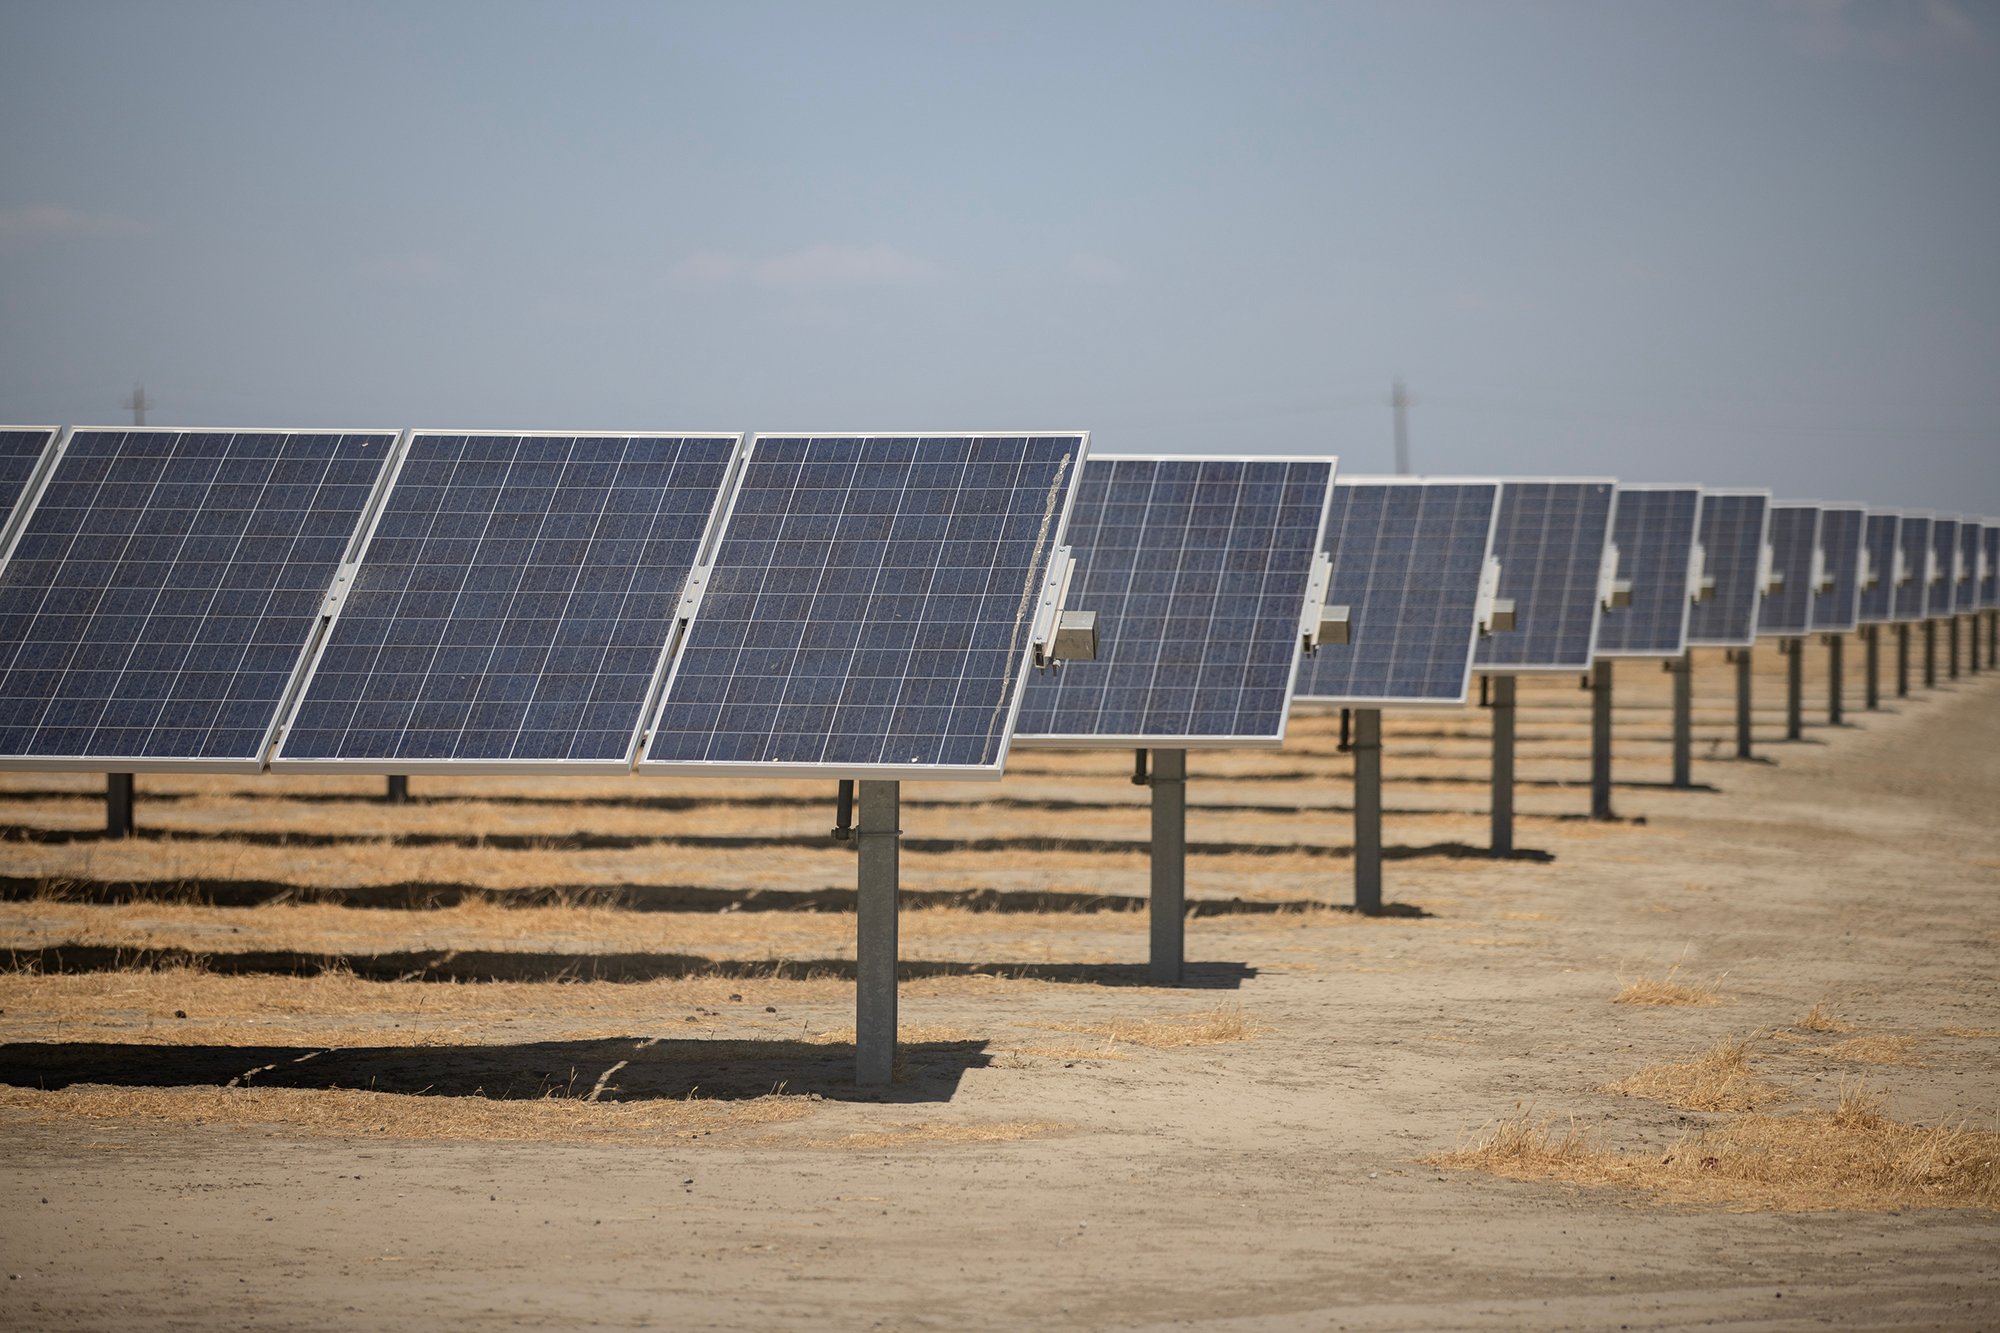 California sides with big utilities, trimming incentives for community solar